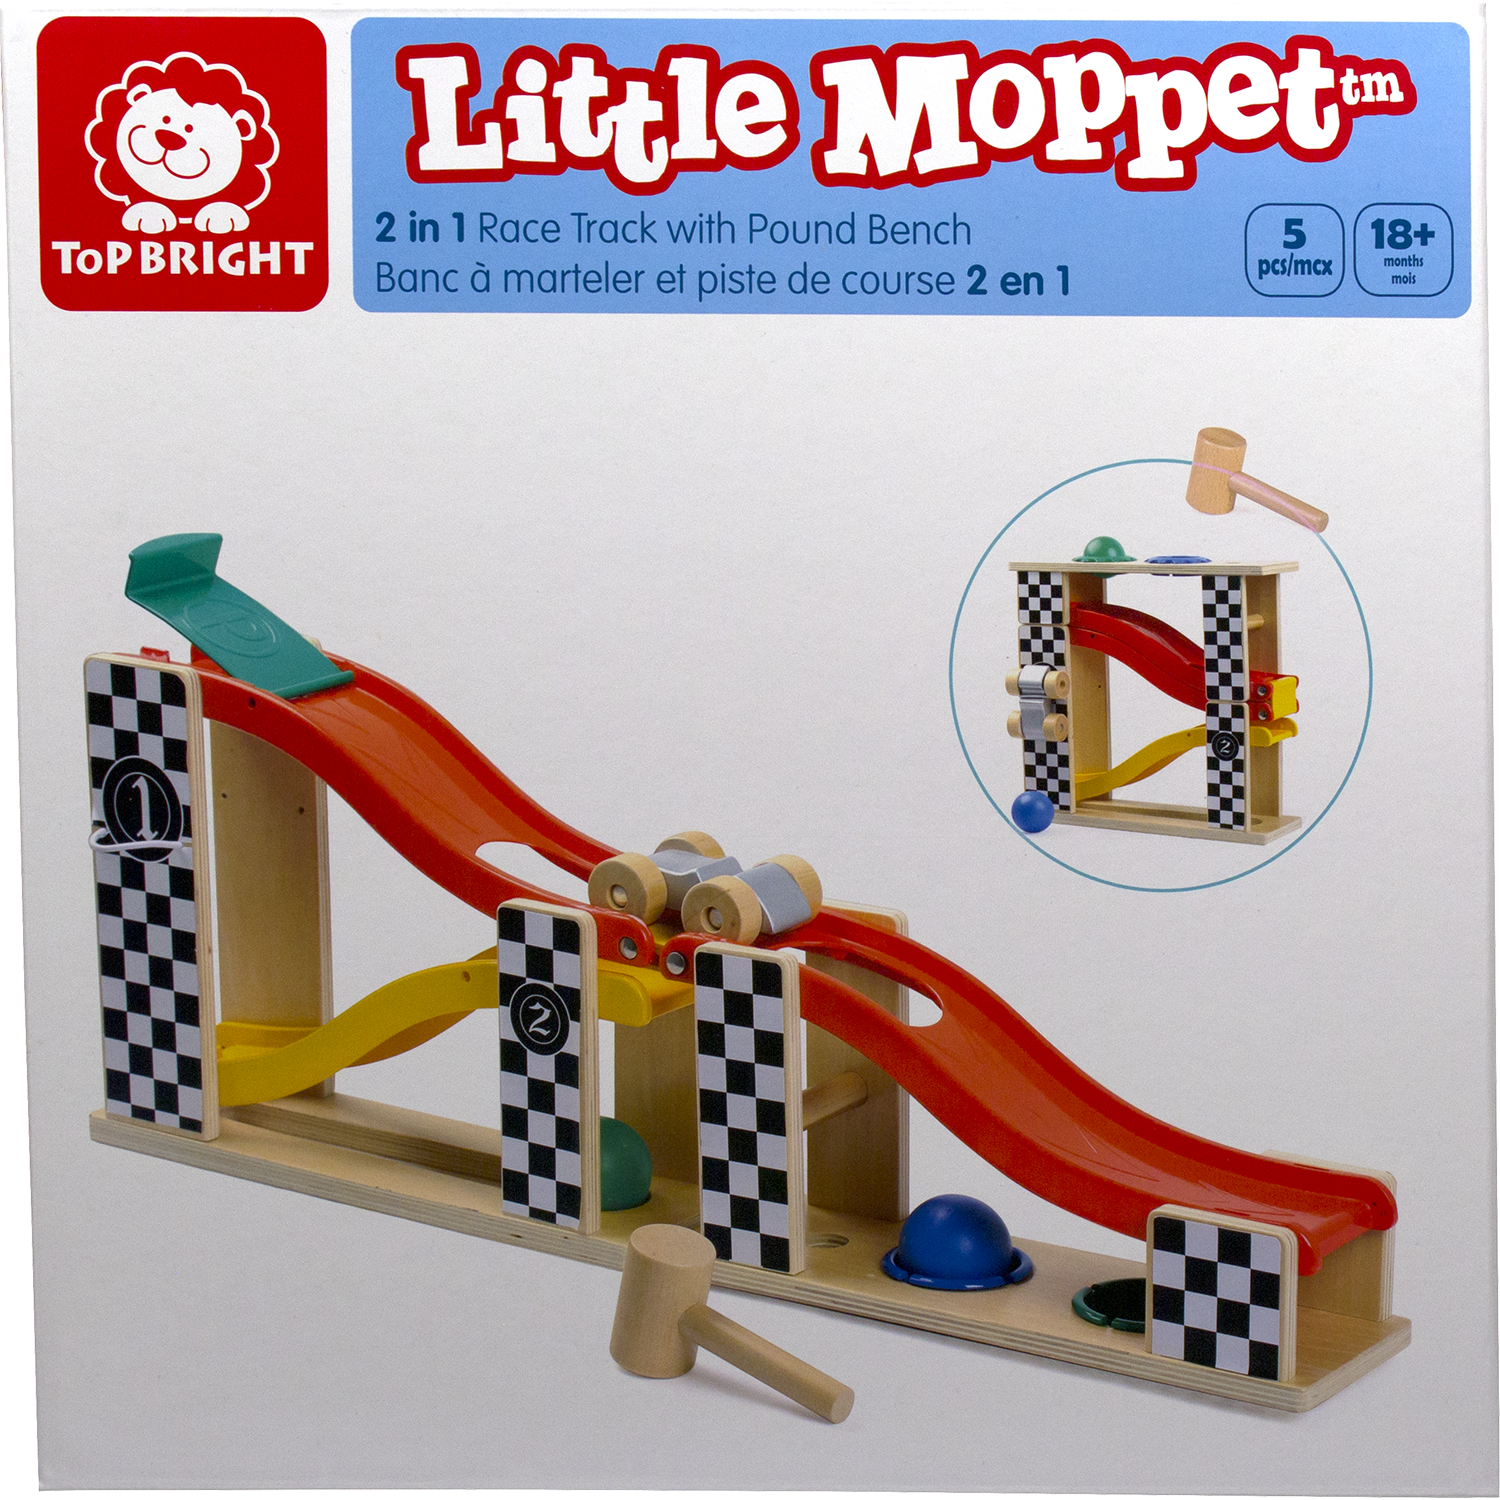 2-in-1 race track w/ pound bench